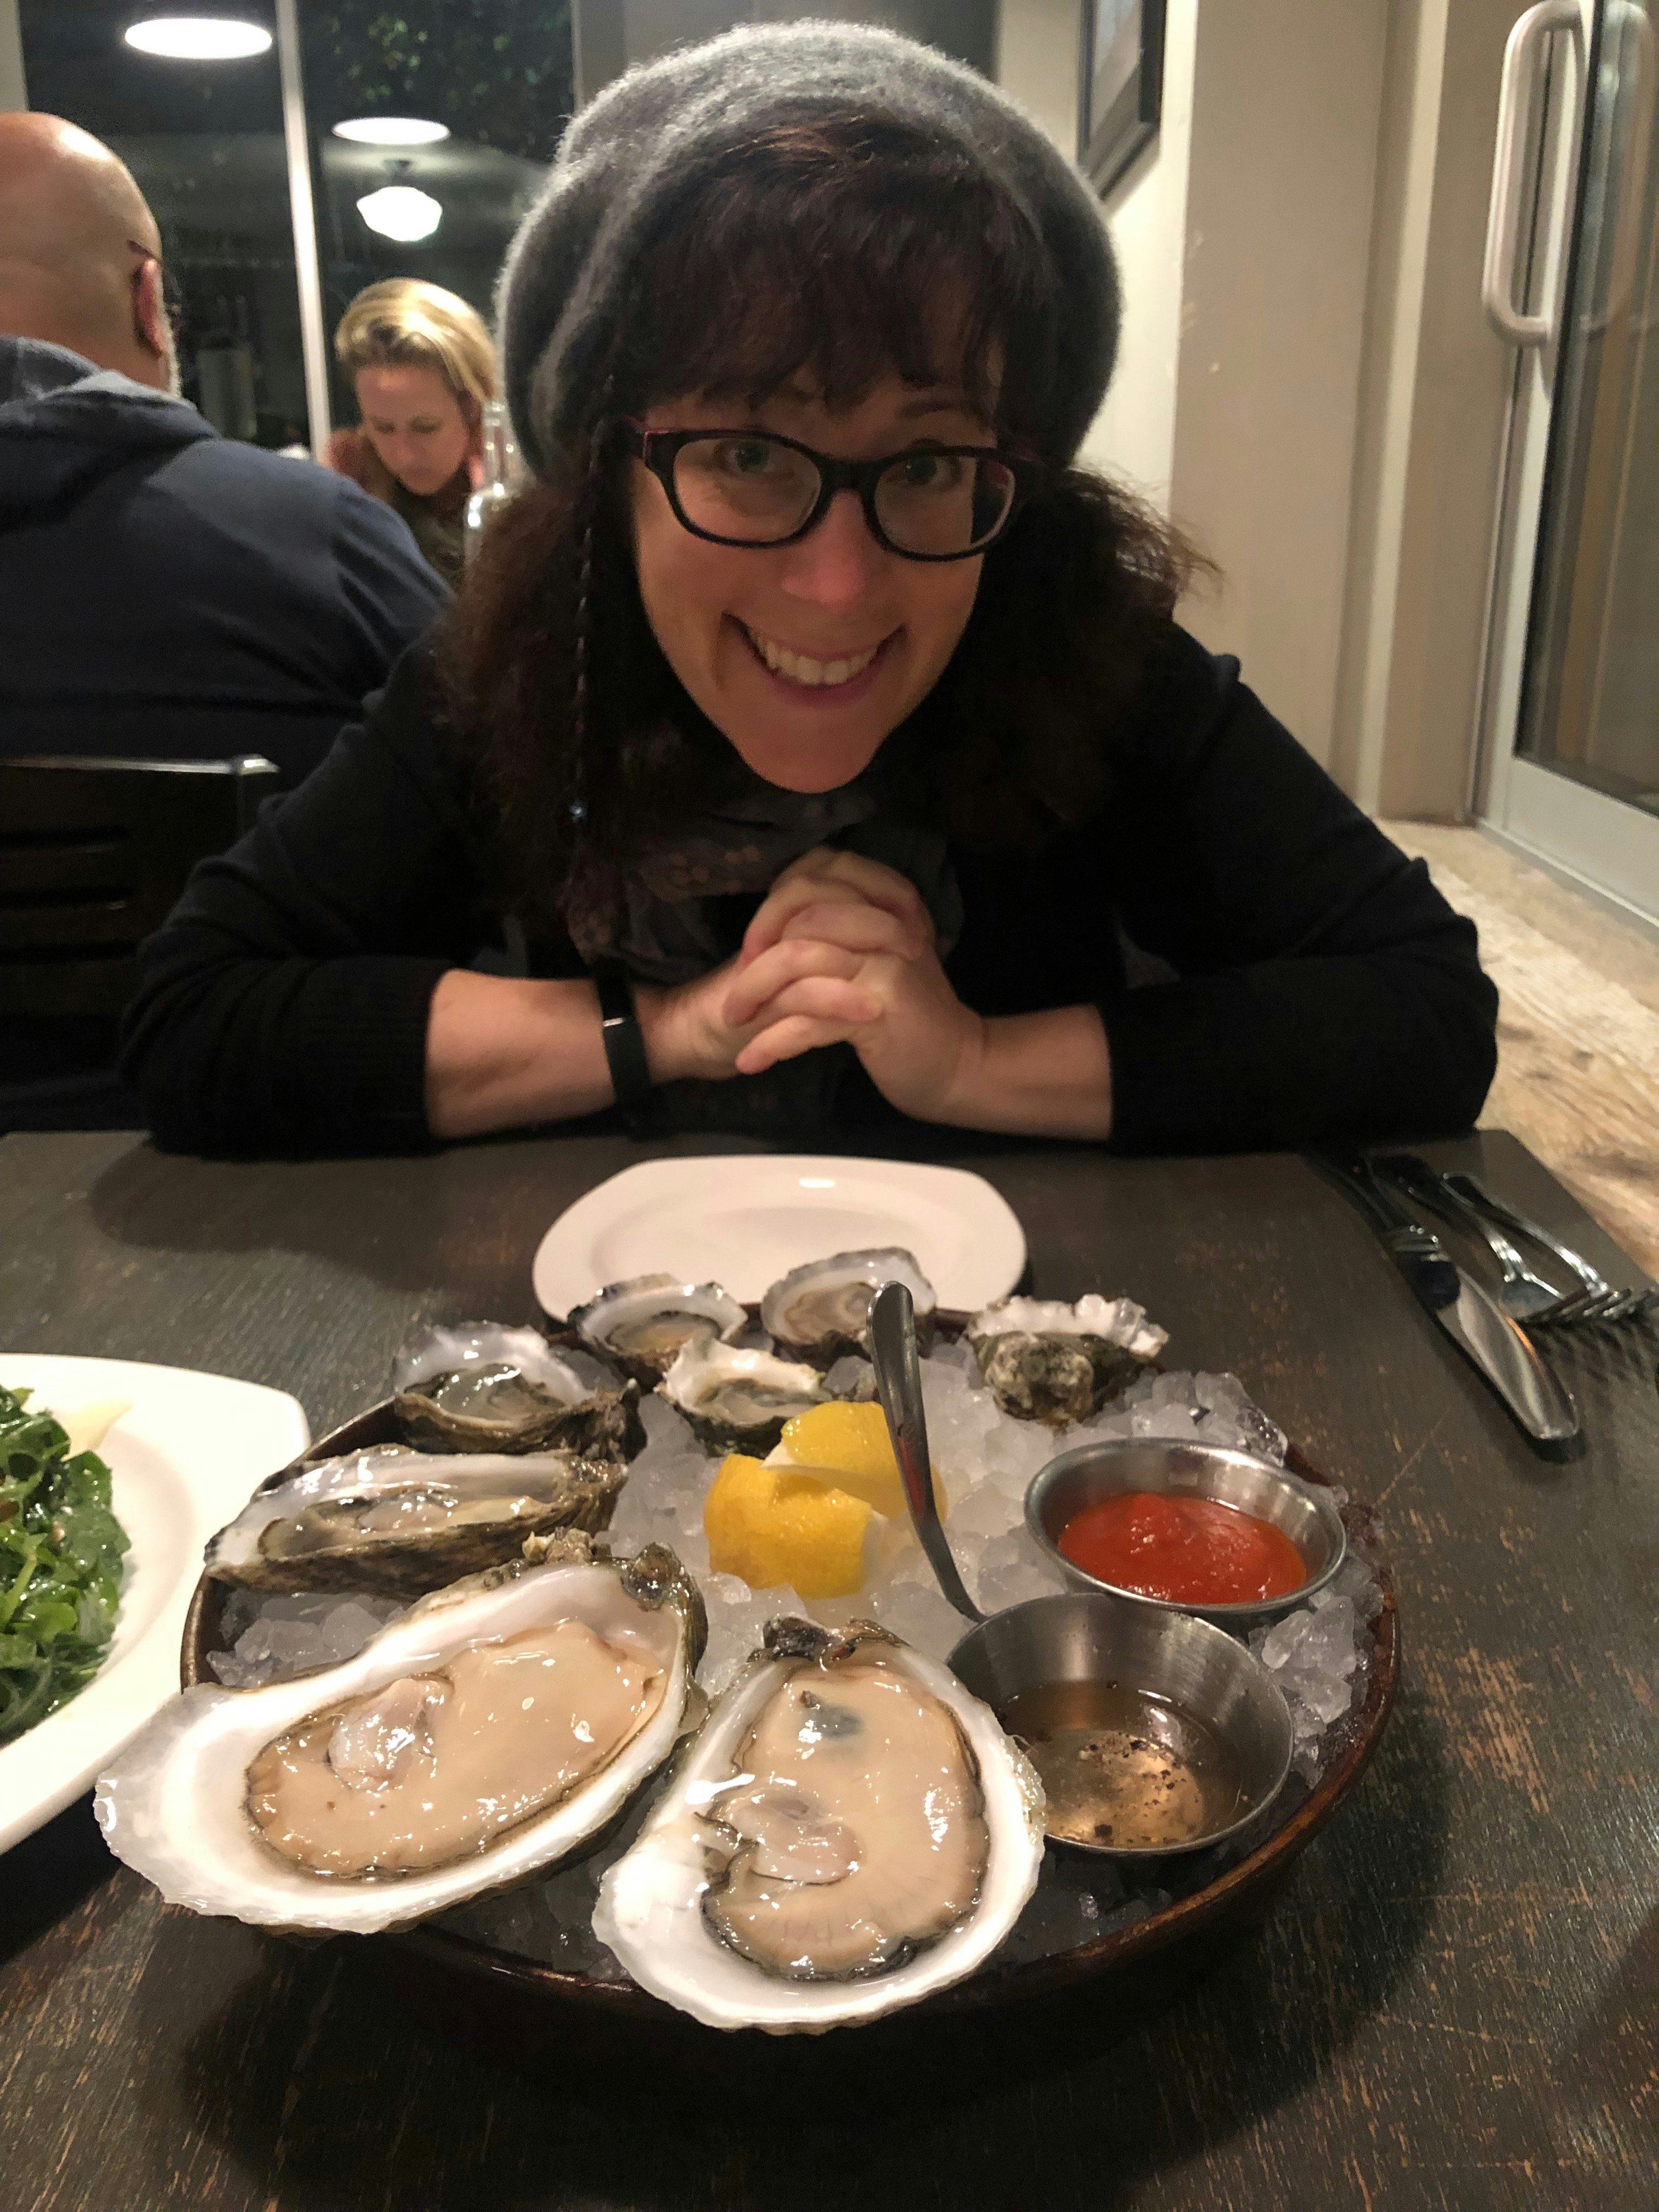 A woman smiling next to a plate of raw oysters